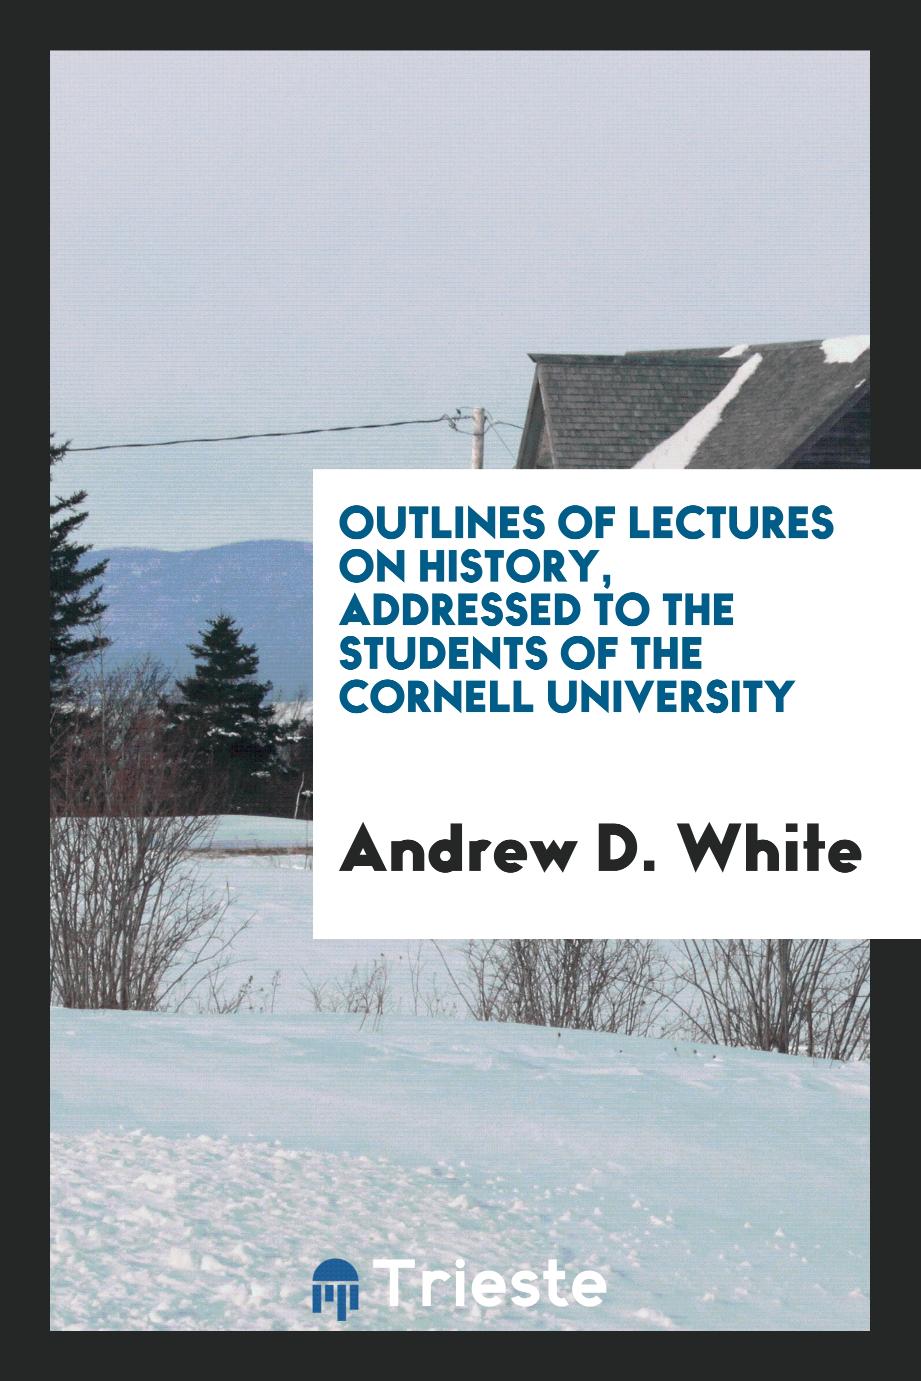 Outlines of lectures on history, addressed to the students of the Cornell University